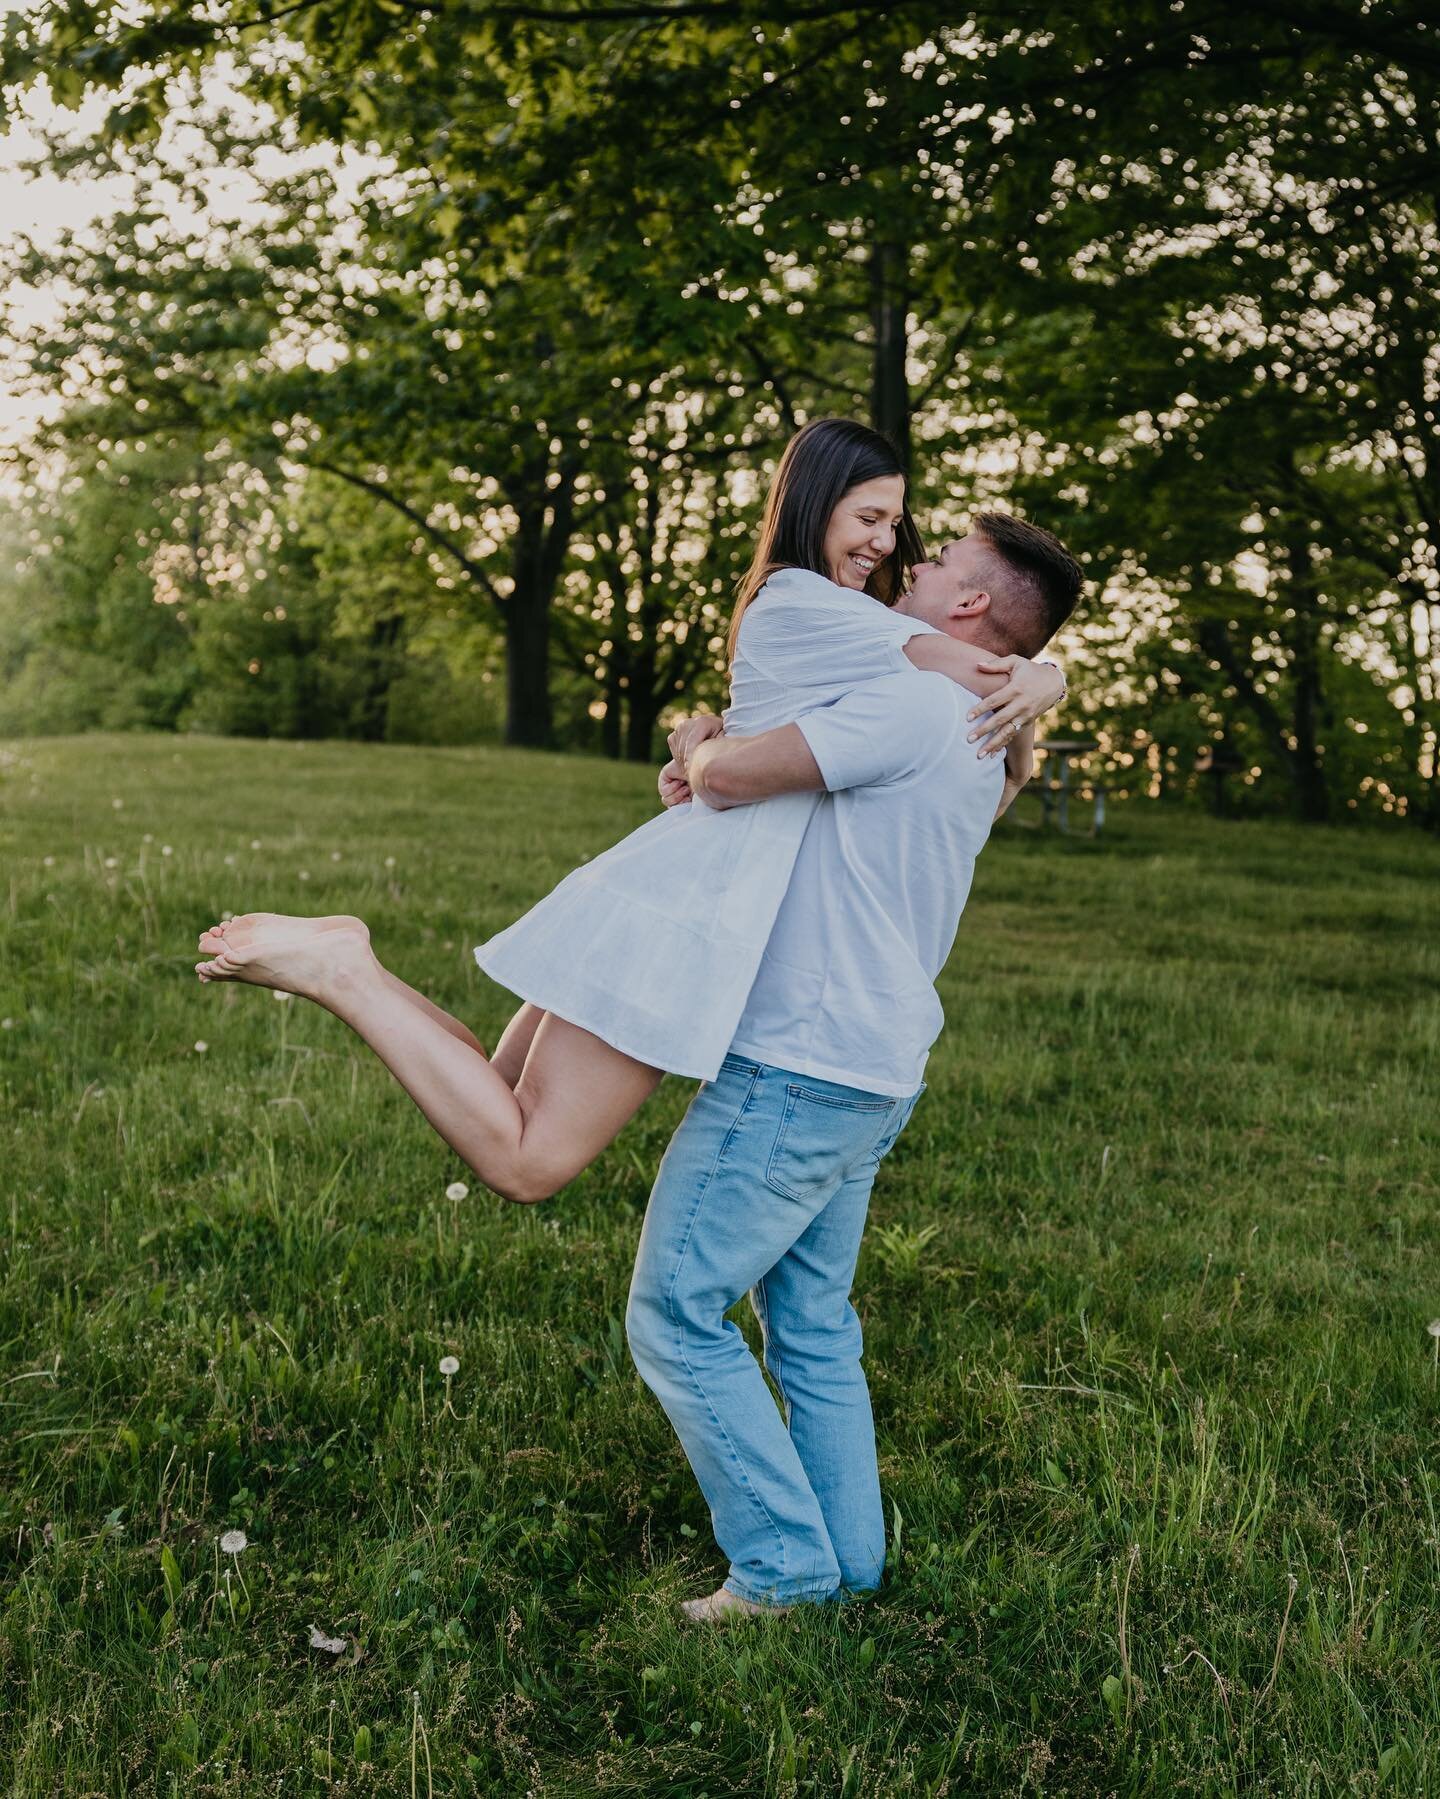 Couldn&rsquo;t resist sharing more from Jenna and Noah&rsquo;s engagement session at Moraine. MAGIC 😍